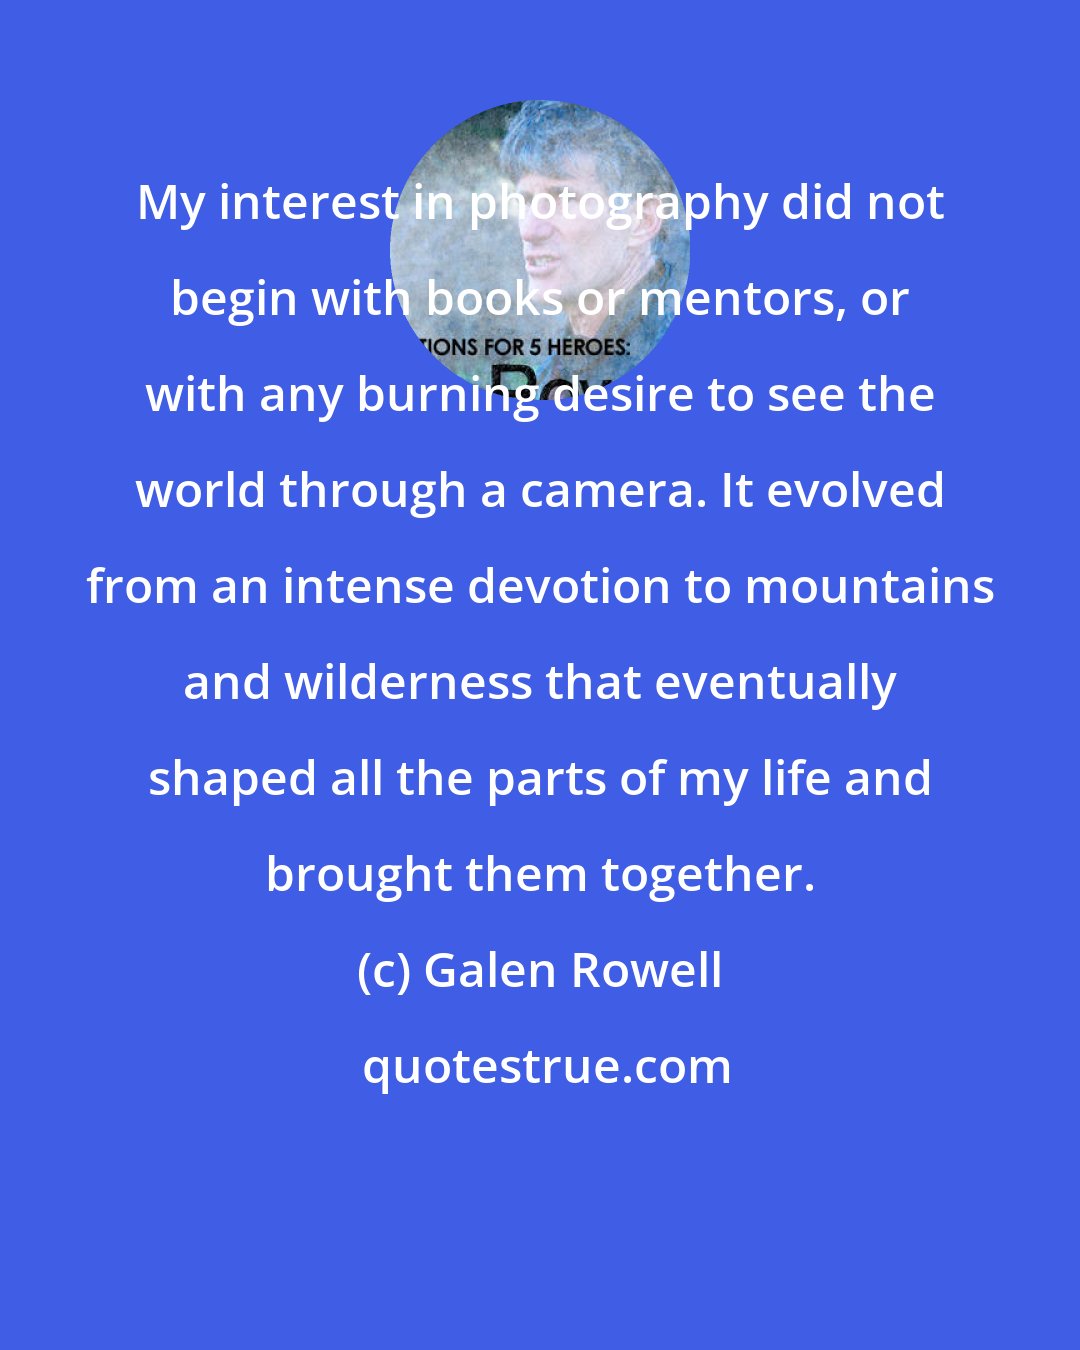 Galen Rowell: My interest in photography did not begin with books or mentors, or with any burning desire to see the world through a camera. It evolved from an intense devotion to mountains and wilderness that eventually shaped all the parts of my life and brought them together.